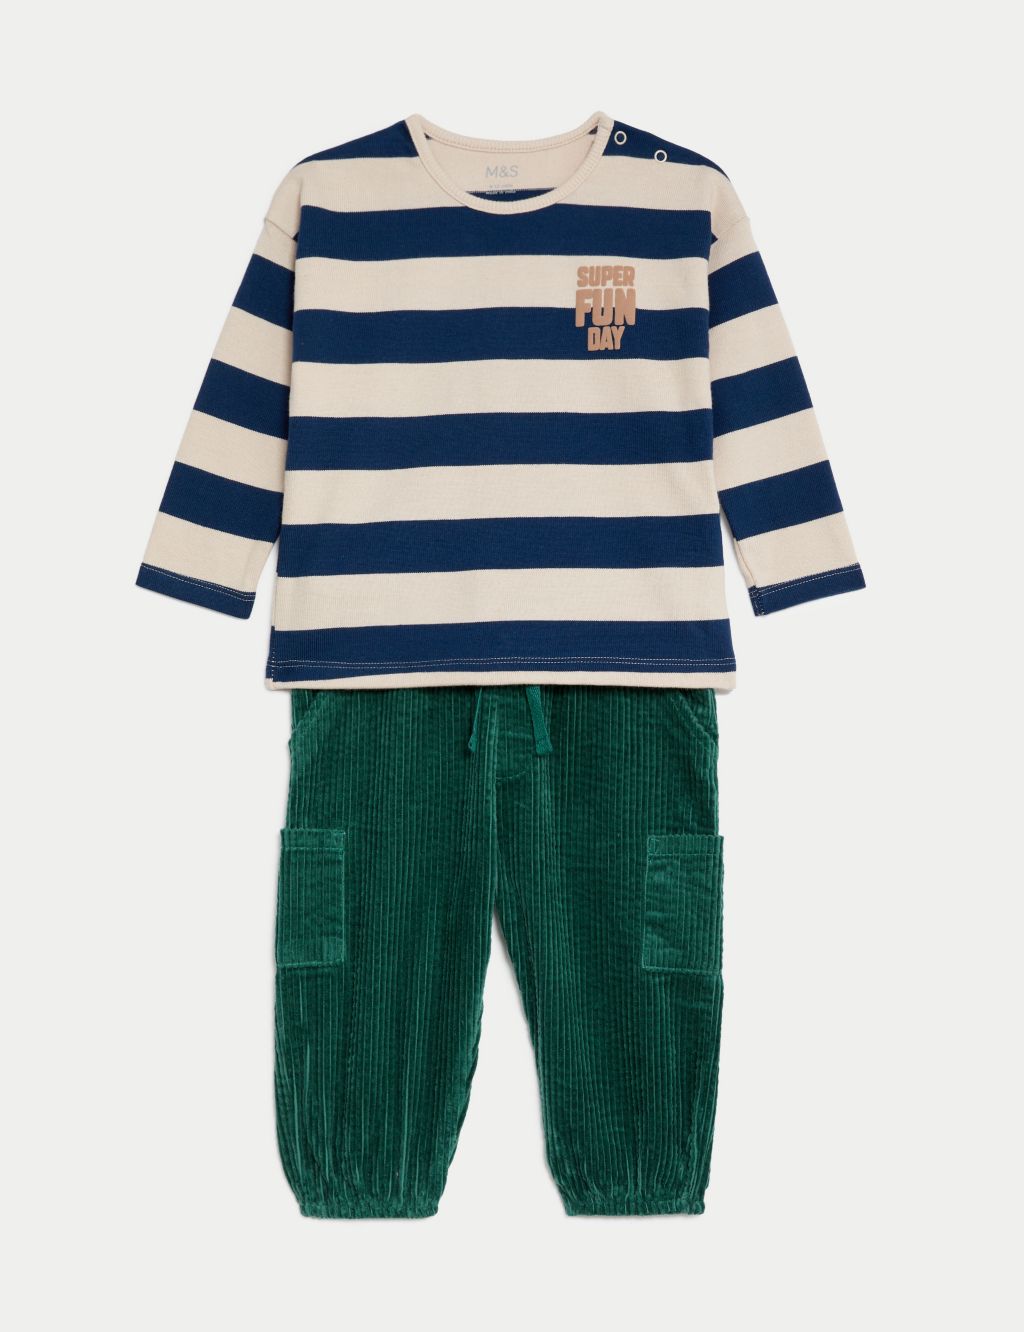 2pc Pure Cotton Striped Outfit (0-3 Yrs) image 1